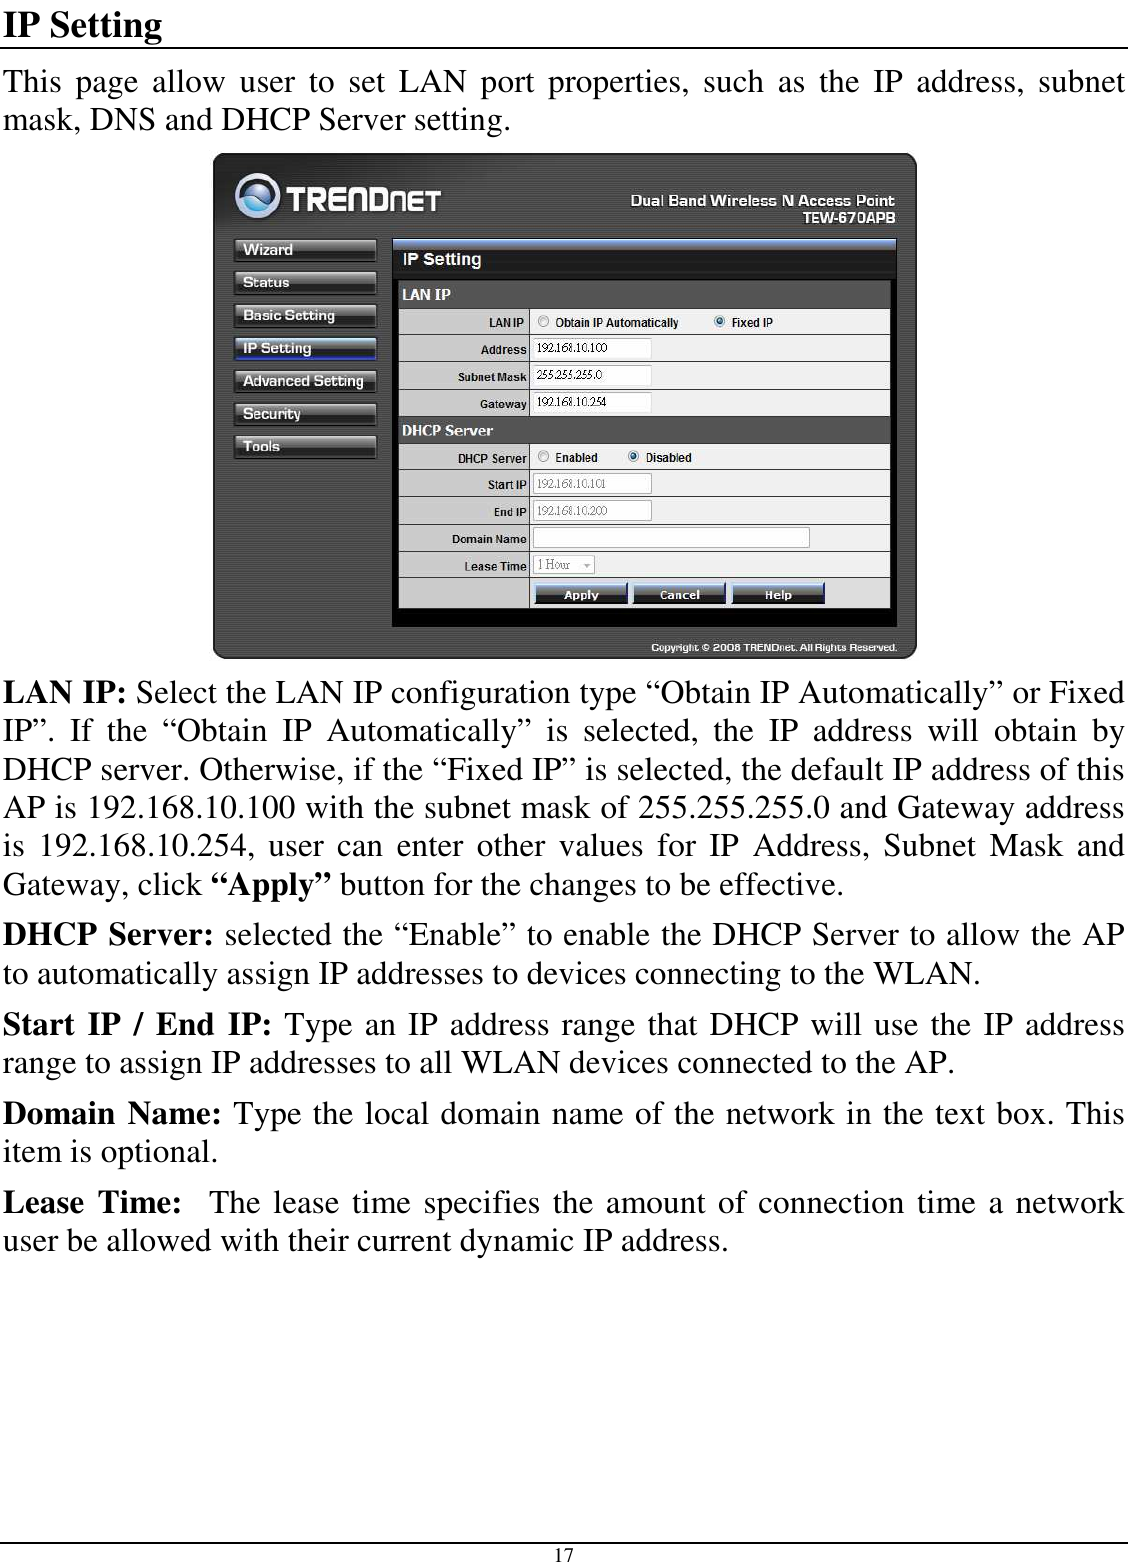  17 IP Setting This  page  allow  user  to  set  LAN  port  properties,  such  as  the  IP  address,  subnet mask, DNS and DHCP Server setting.  LAN IP: Select the LAN IP configuration type “Obtain IP Automatically” or Fixed IP”.  If  the  “Obtain  IP  Automatically”  is  selected,  the  IP  address  will  obtain  by DHCP server. Otherwise, if the “Fixed IP” is selected, the default IP address of this AP is 192.168.10.100 with the subnet mask of 255.255.255.0 and Gateway address is  192.168.10.254,  user  can enter  other values  for  IP  Address,  Subnet  Mask  and  Gateway, click “Apply” button for the changes to be effective.  DHCP Server: selected the “Enable” to enable the DHCP Server to allow the AP to automatically assign IP addresses to devices connecting to the WLAN. Start IP / End IP: Type an IP address range that DHCP will use the IP address range to assign IP addresses to all WLAN devices connected to the AP. Domain Name: Type the local domain name of the network in the text box. This item is optional. Lease Time:  The lease time specifies the amount of connection time a network user be allowed with their current dynamic IP address. 